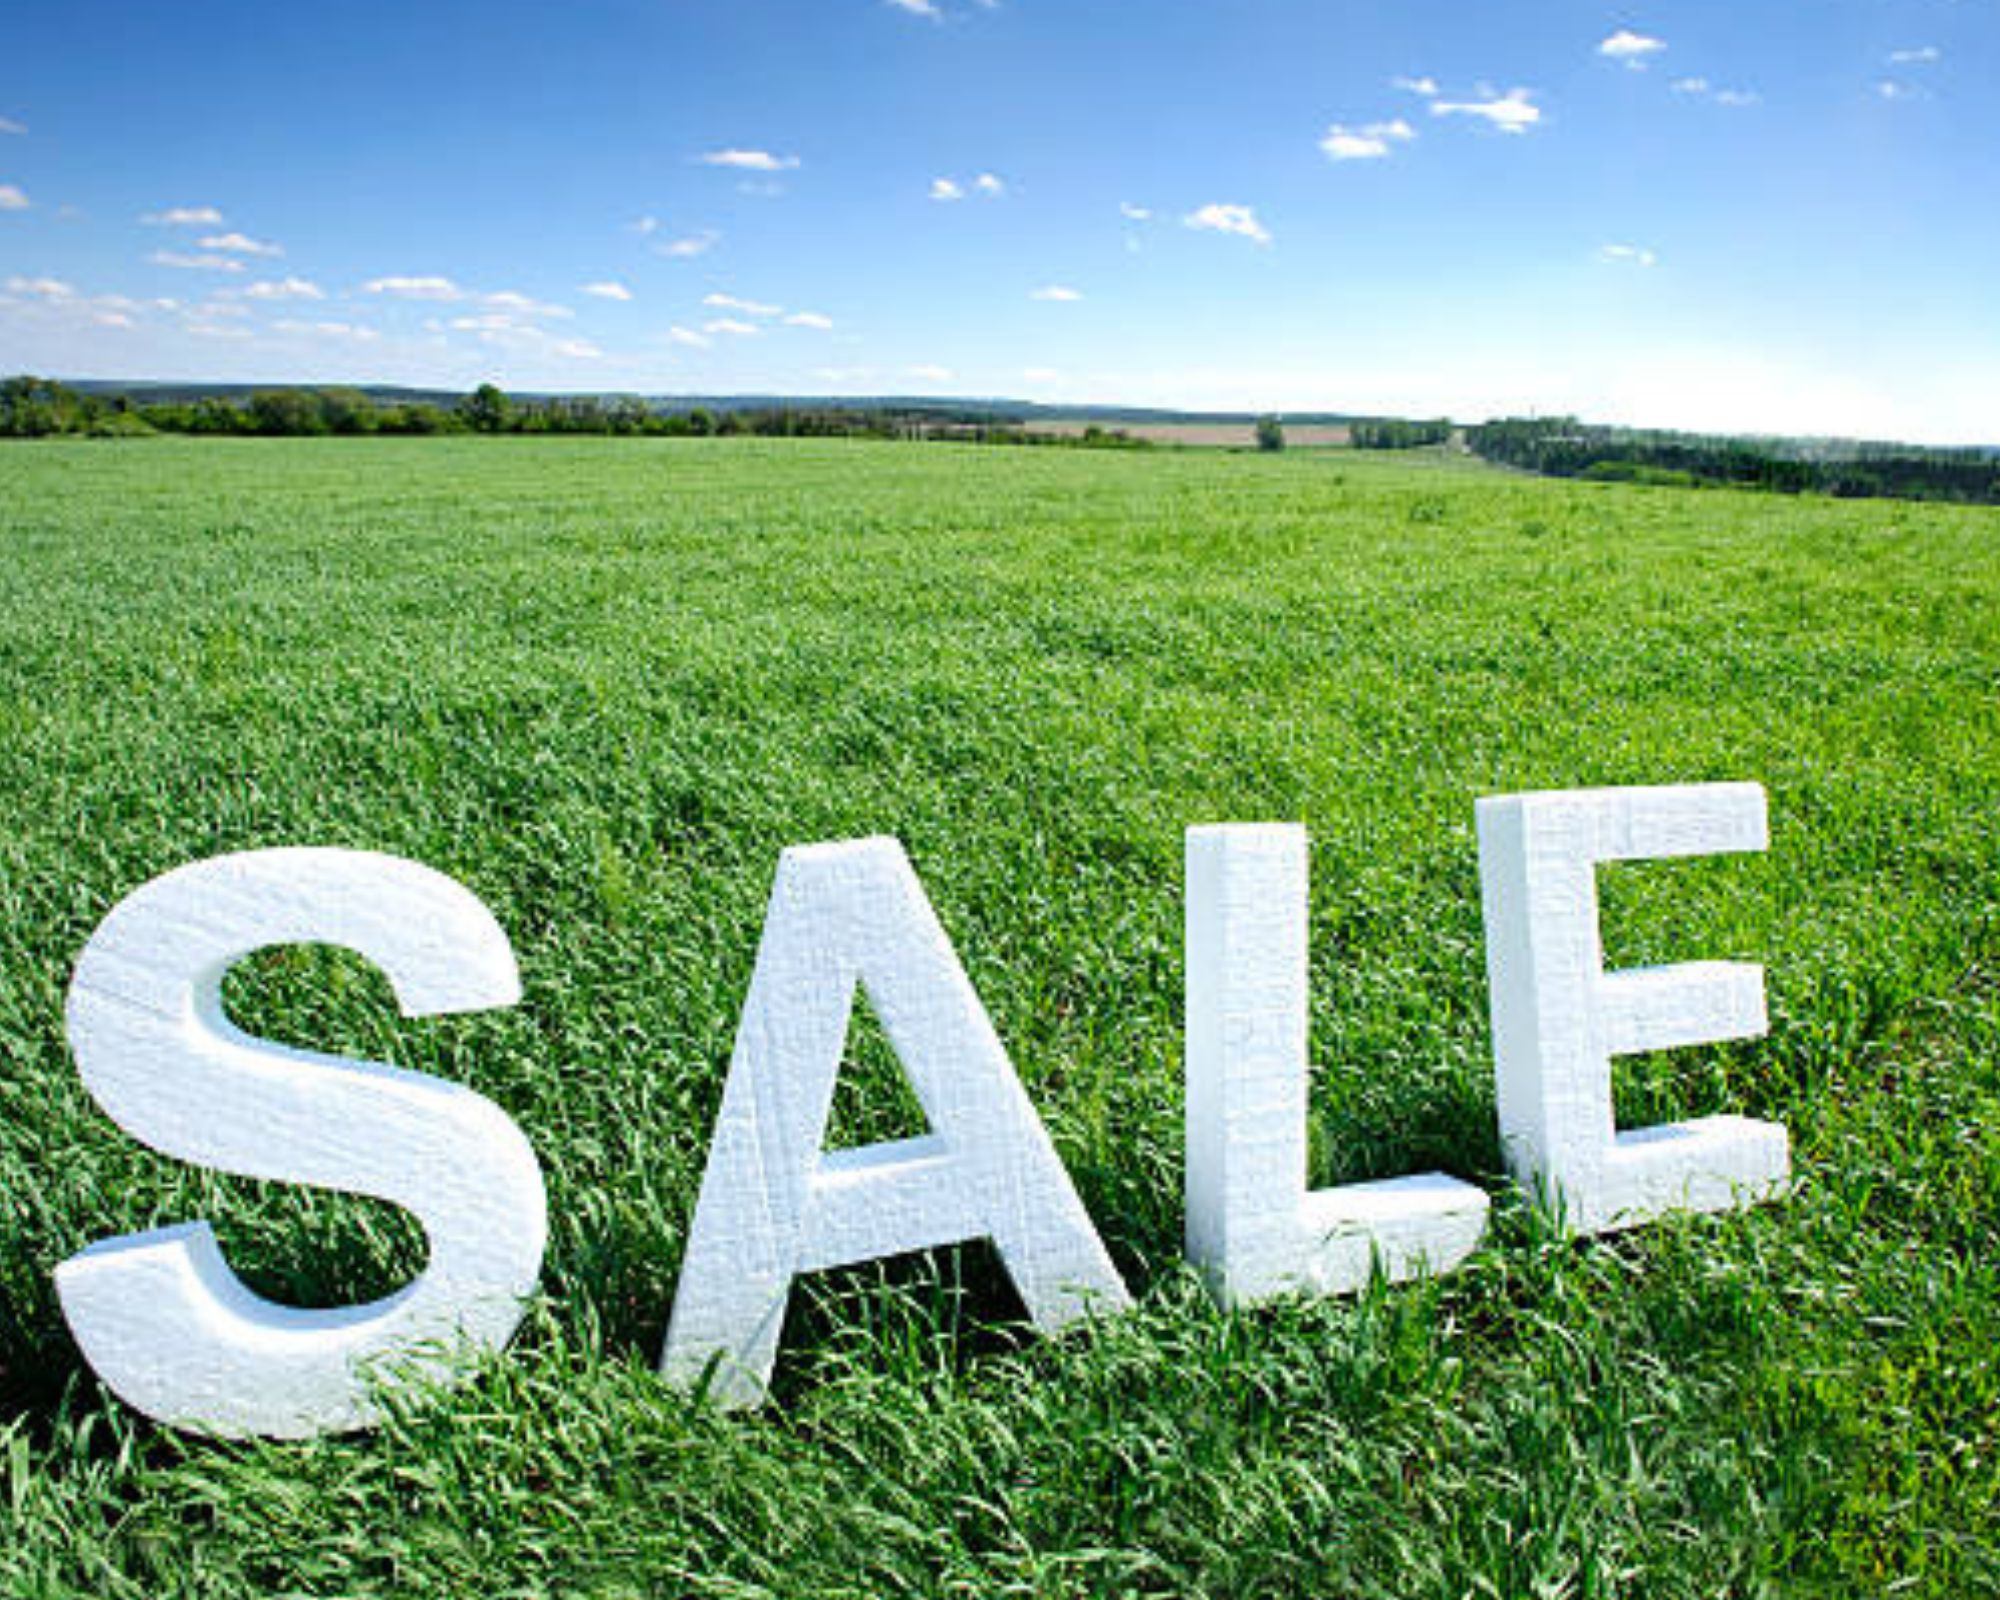 The Ultimate Guide to Selling Your Land Fast - Finding the Right Land-Buying Company